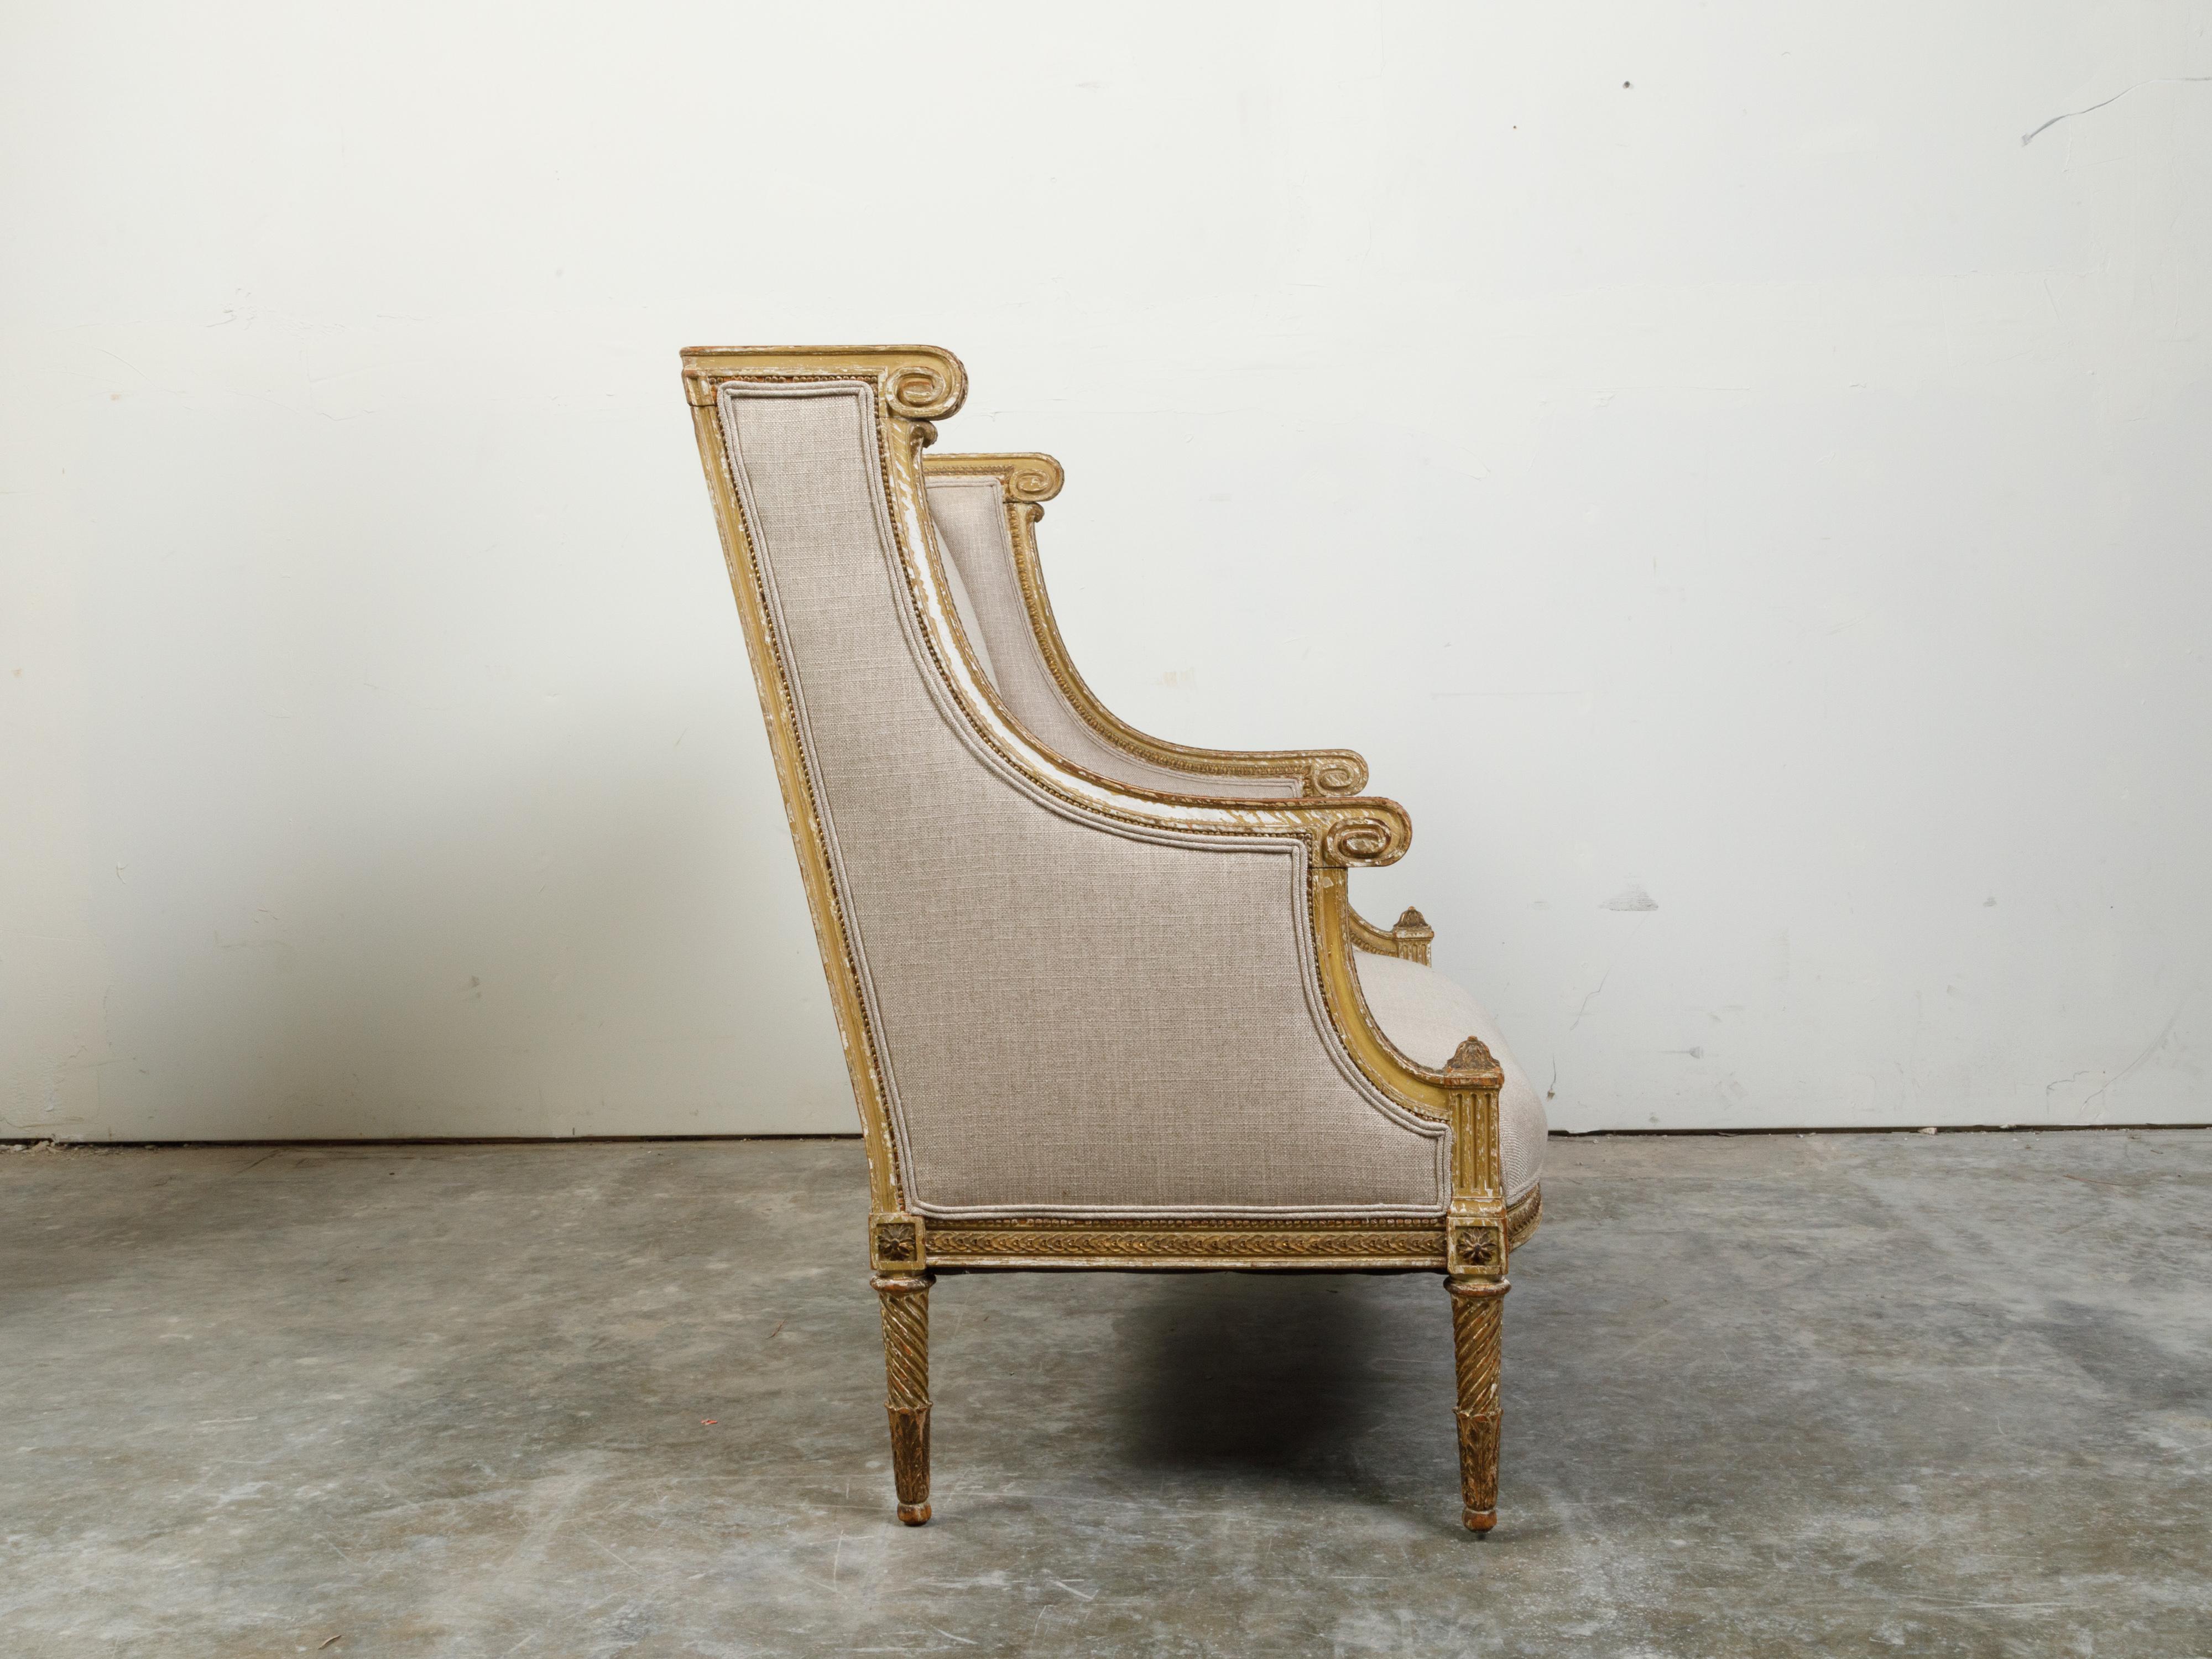 Upholstery French 19th Century Louis XVI Style Giltwood Wingback Settee with Carved Motifs For Sale